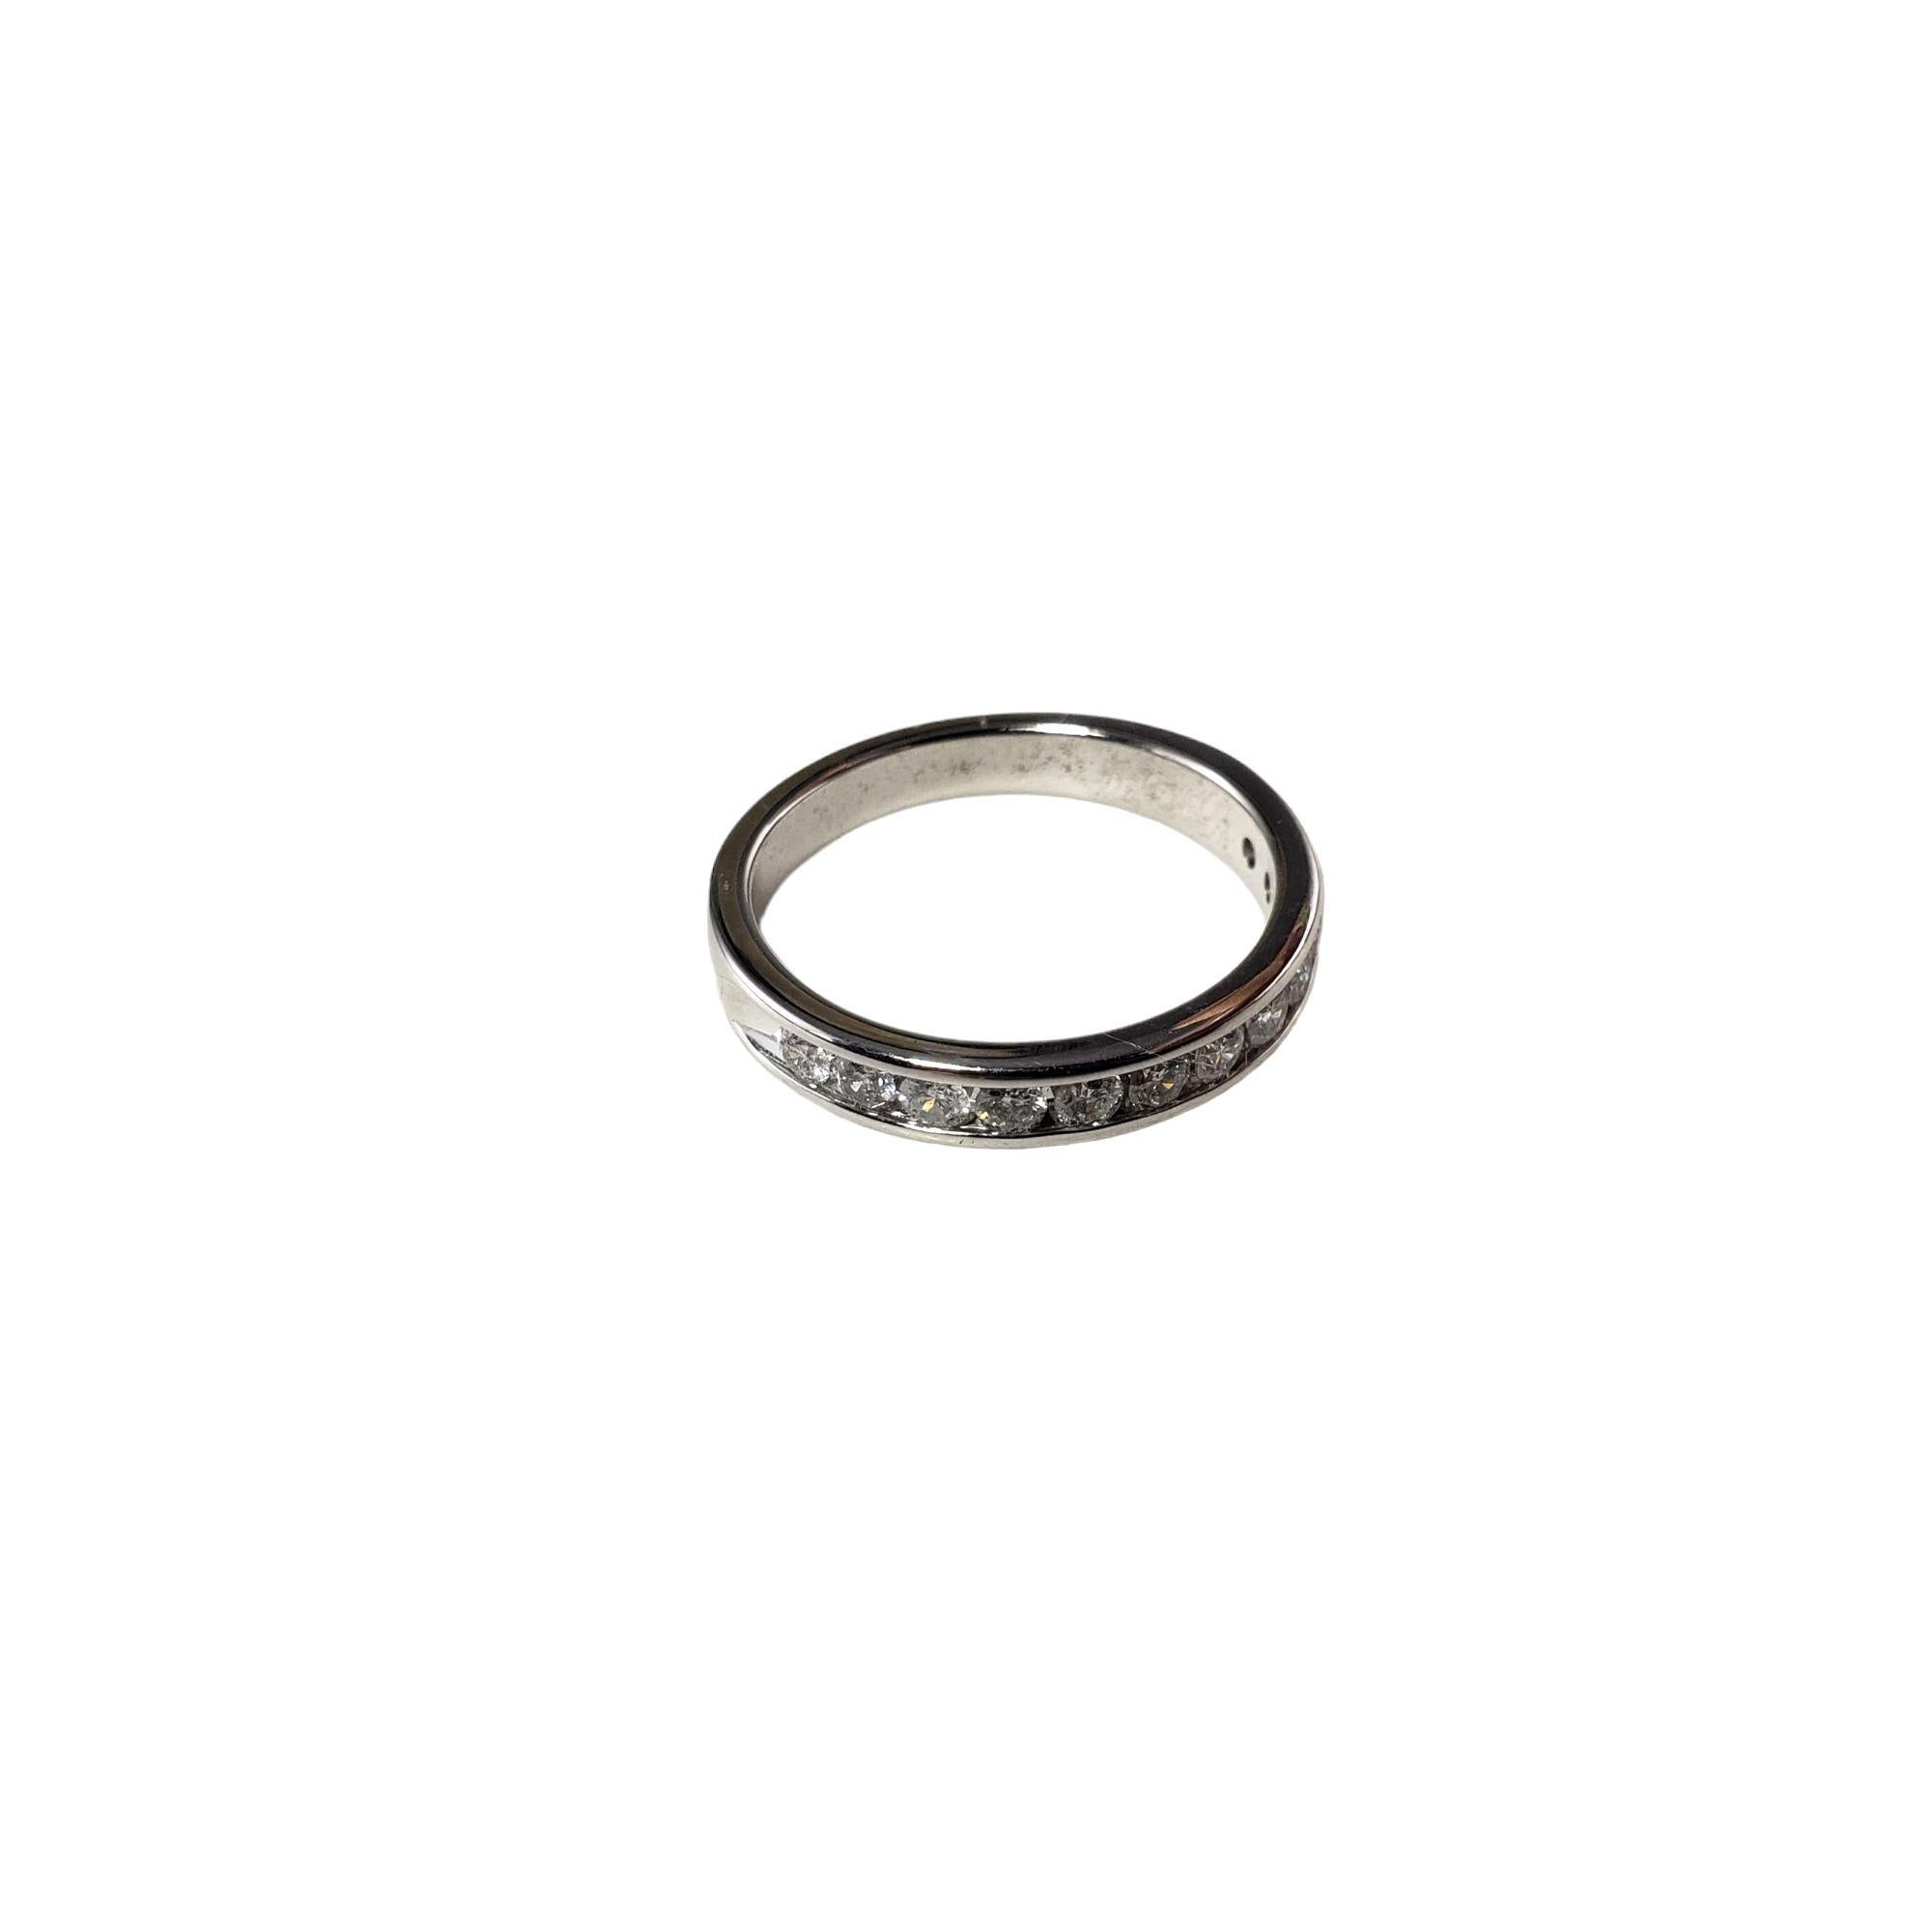 10 Karat White Gold and Diamond Ring Size 7 For Sale 2